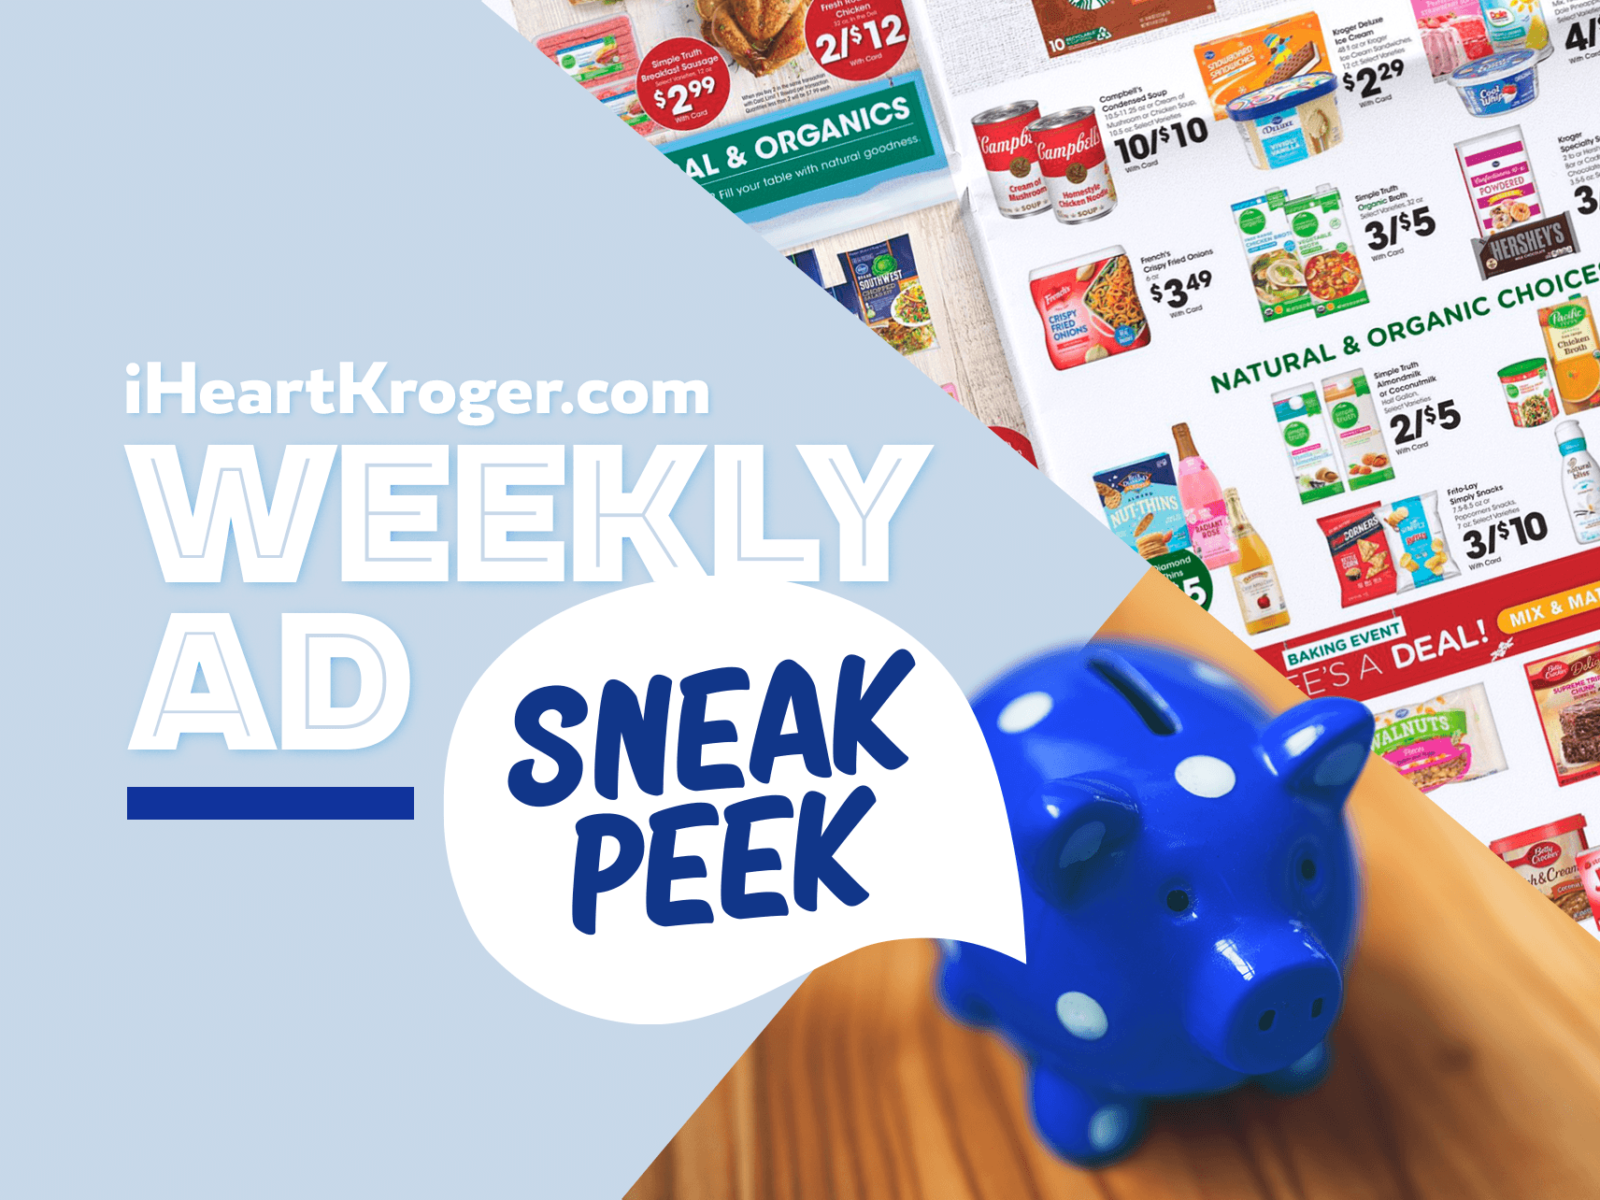 Kroger Ad & Coupons Week Of 2/15 to 2/21